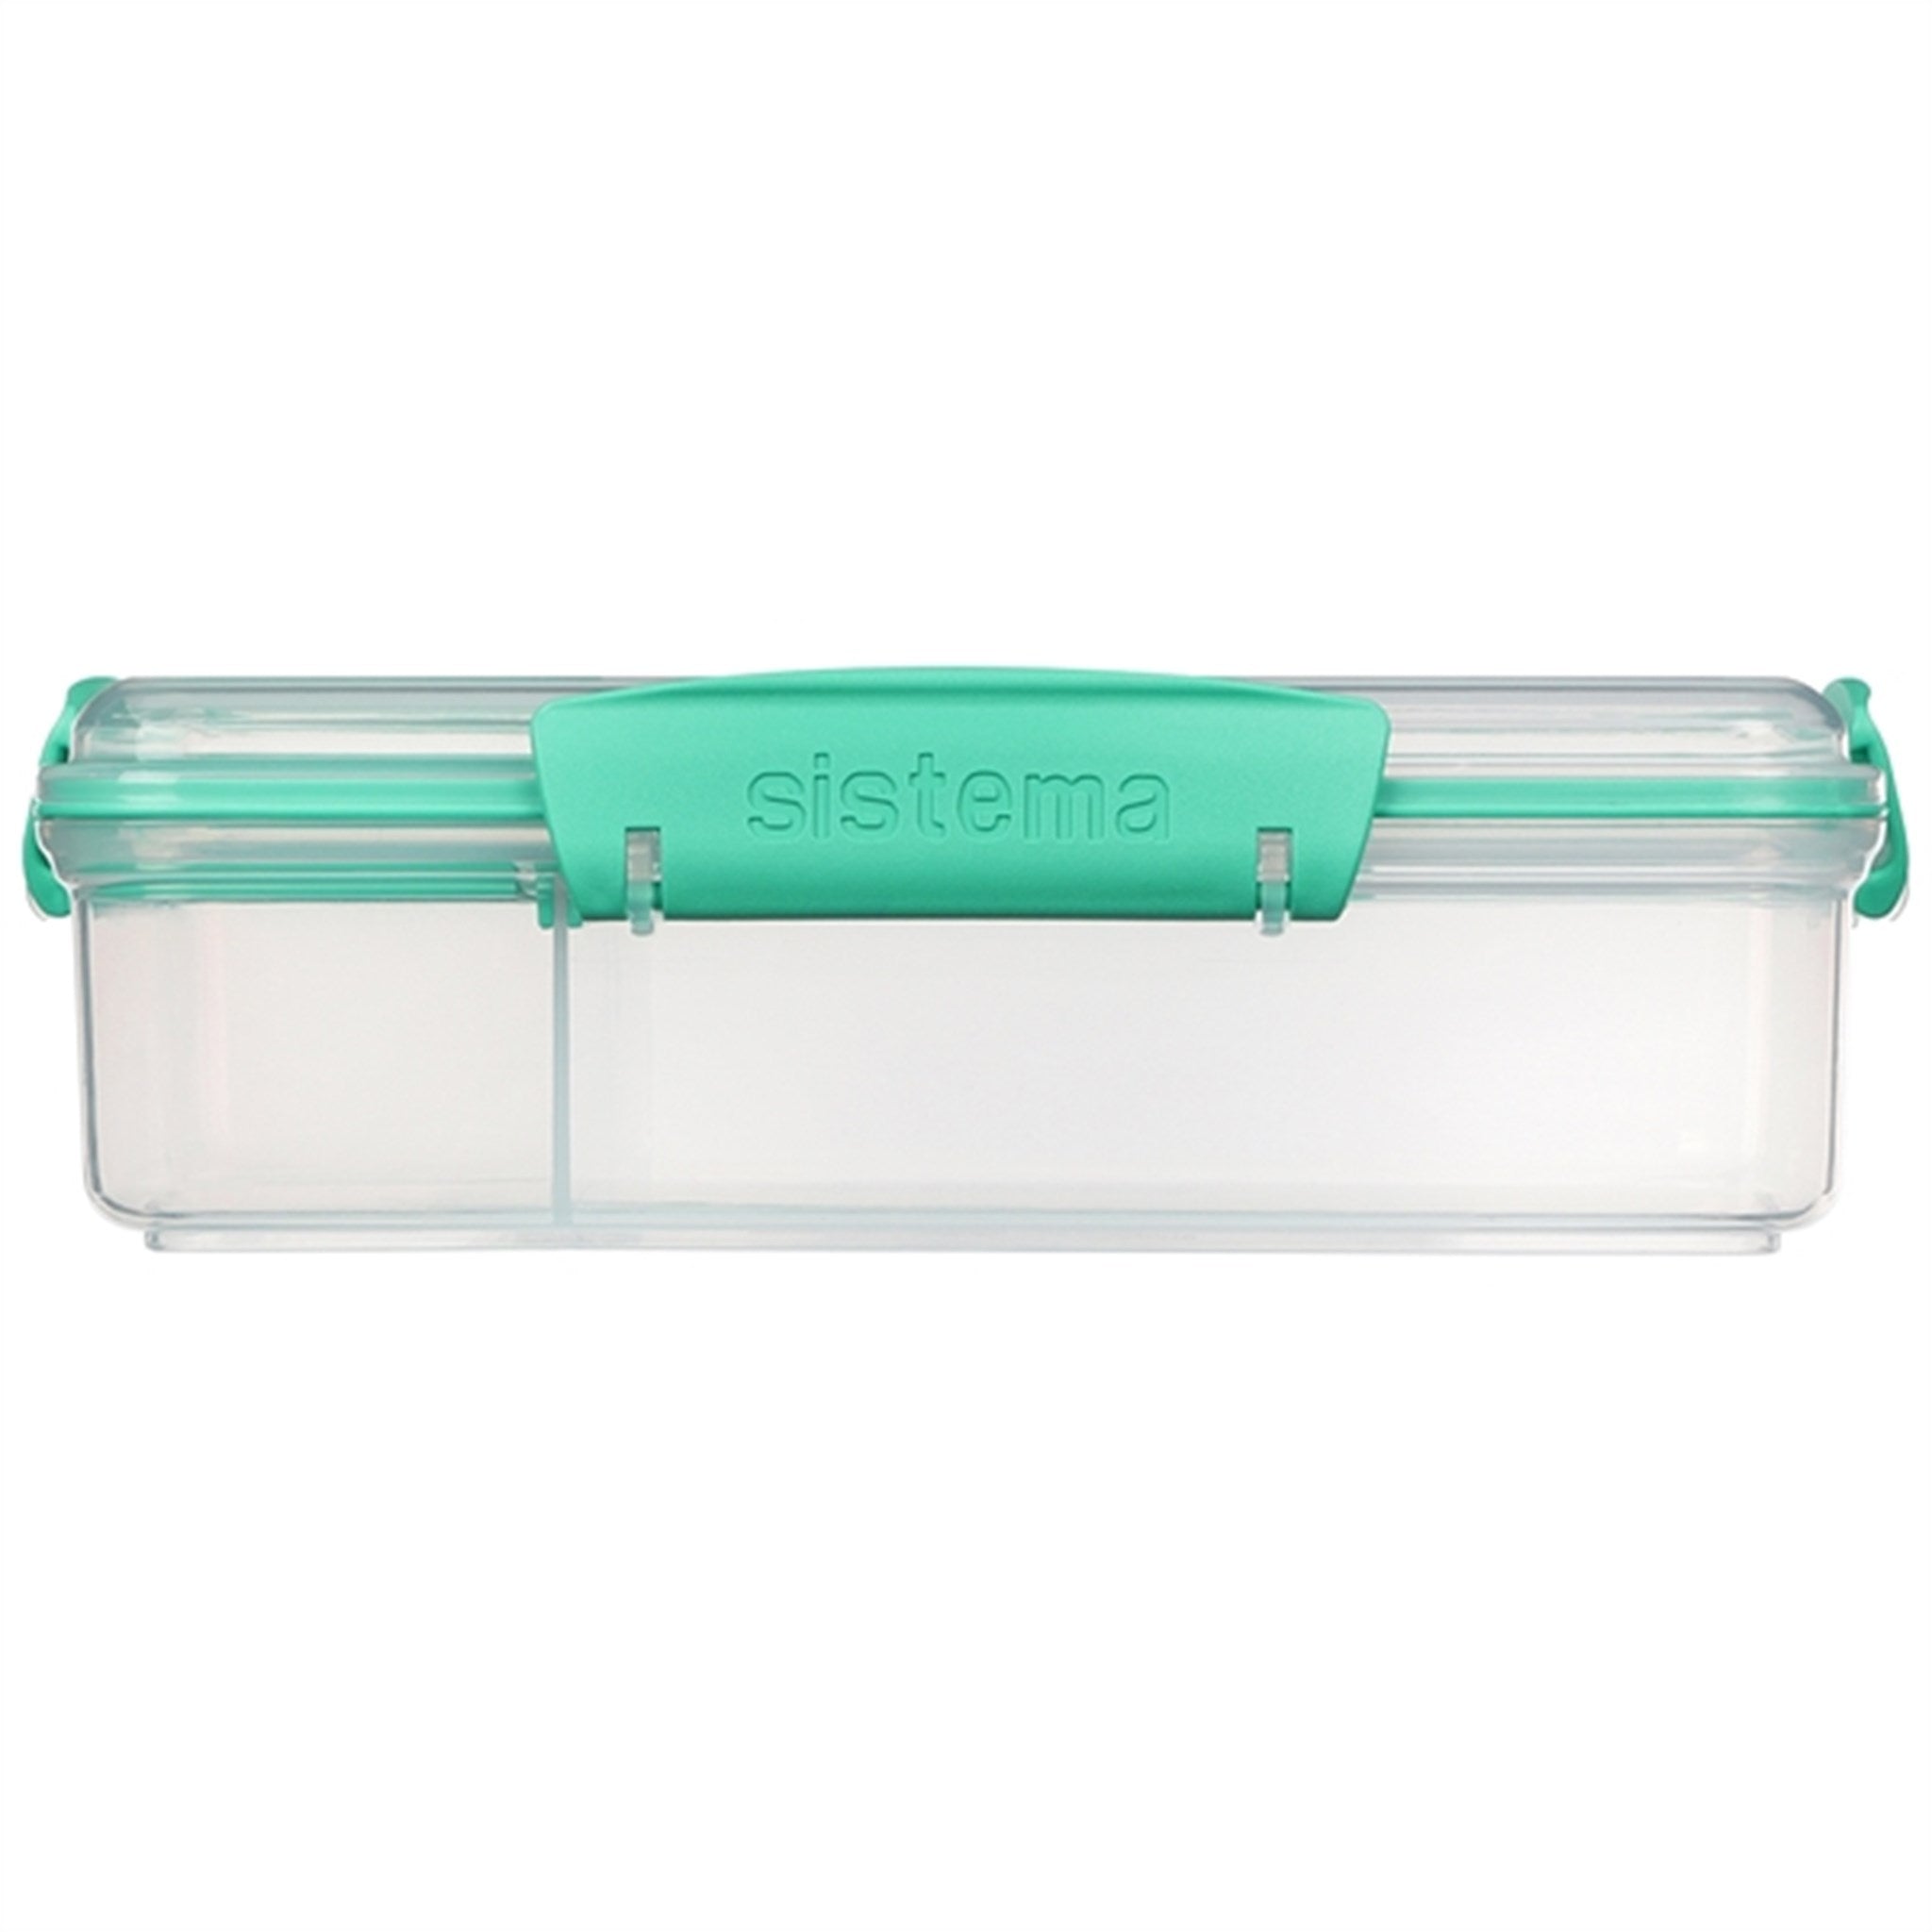 Sistema To Go Snack Attack Duo Lunch Box 975 ml Minty Teal 2